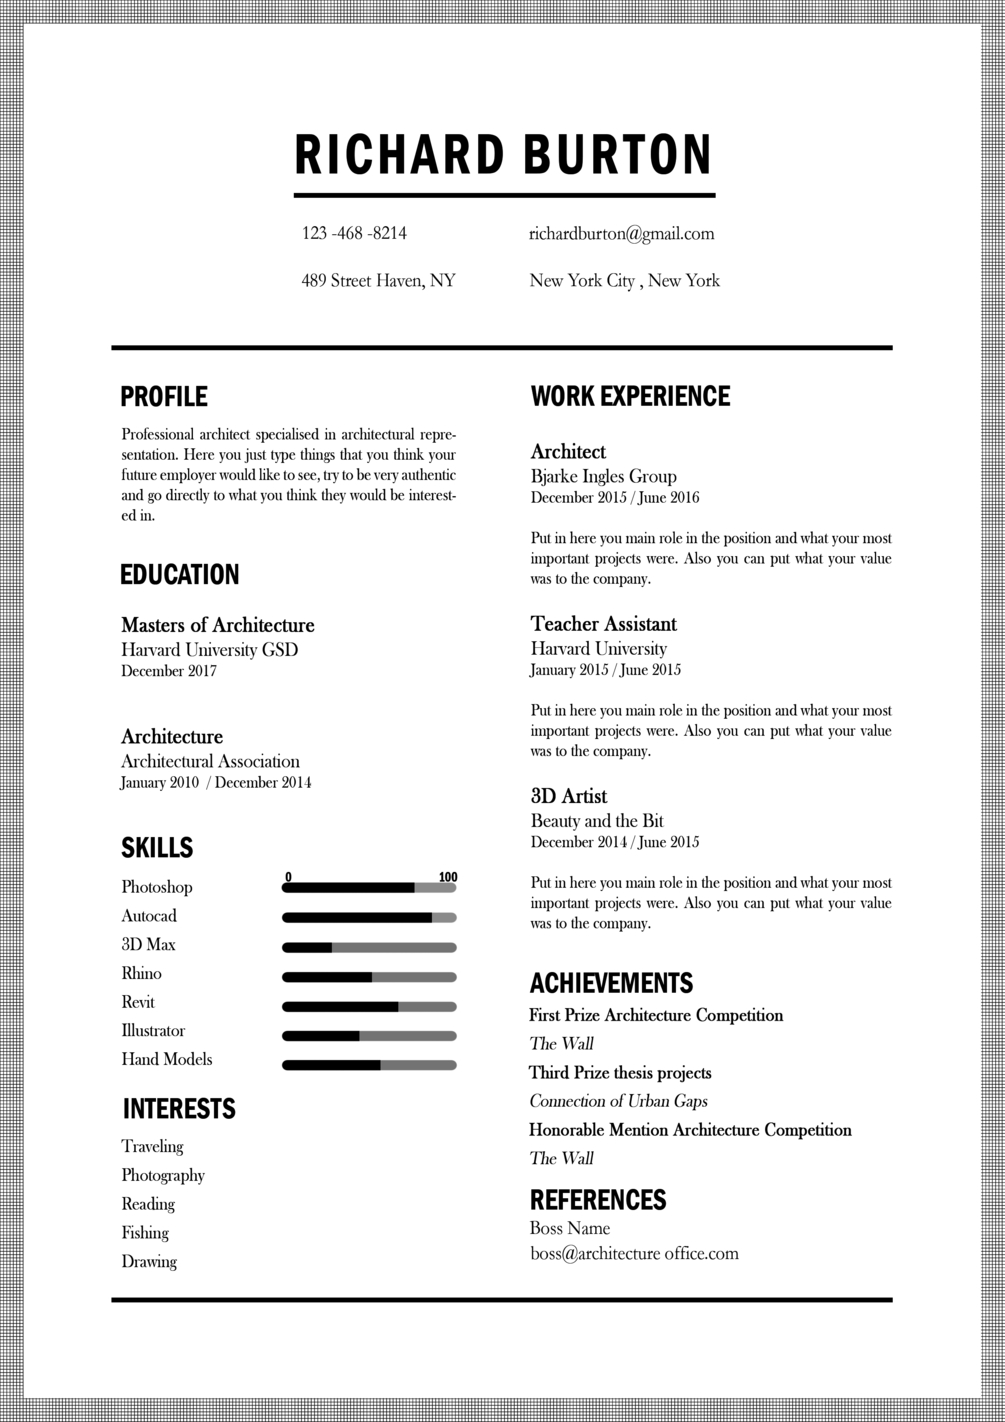 Free Architecture Resume Template Show It Better inside measurements 1005 X 1422